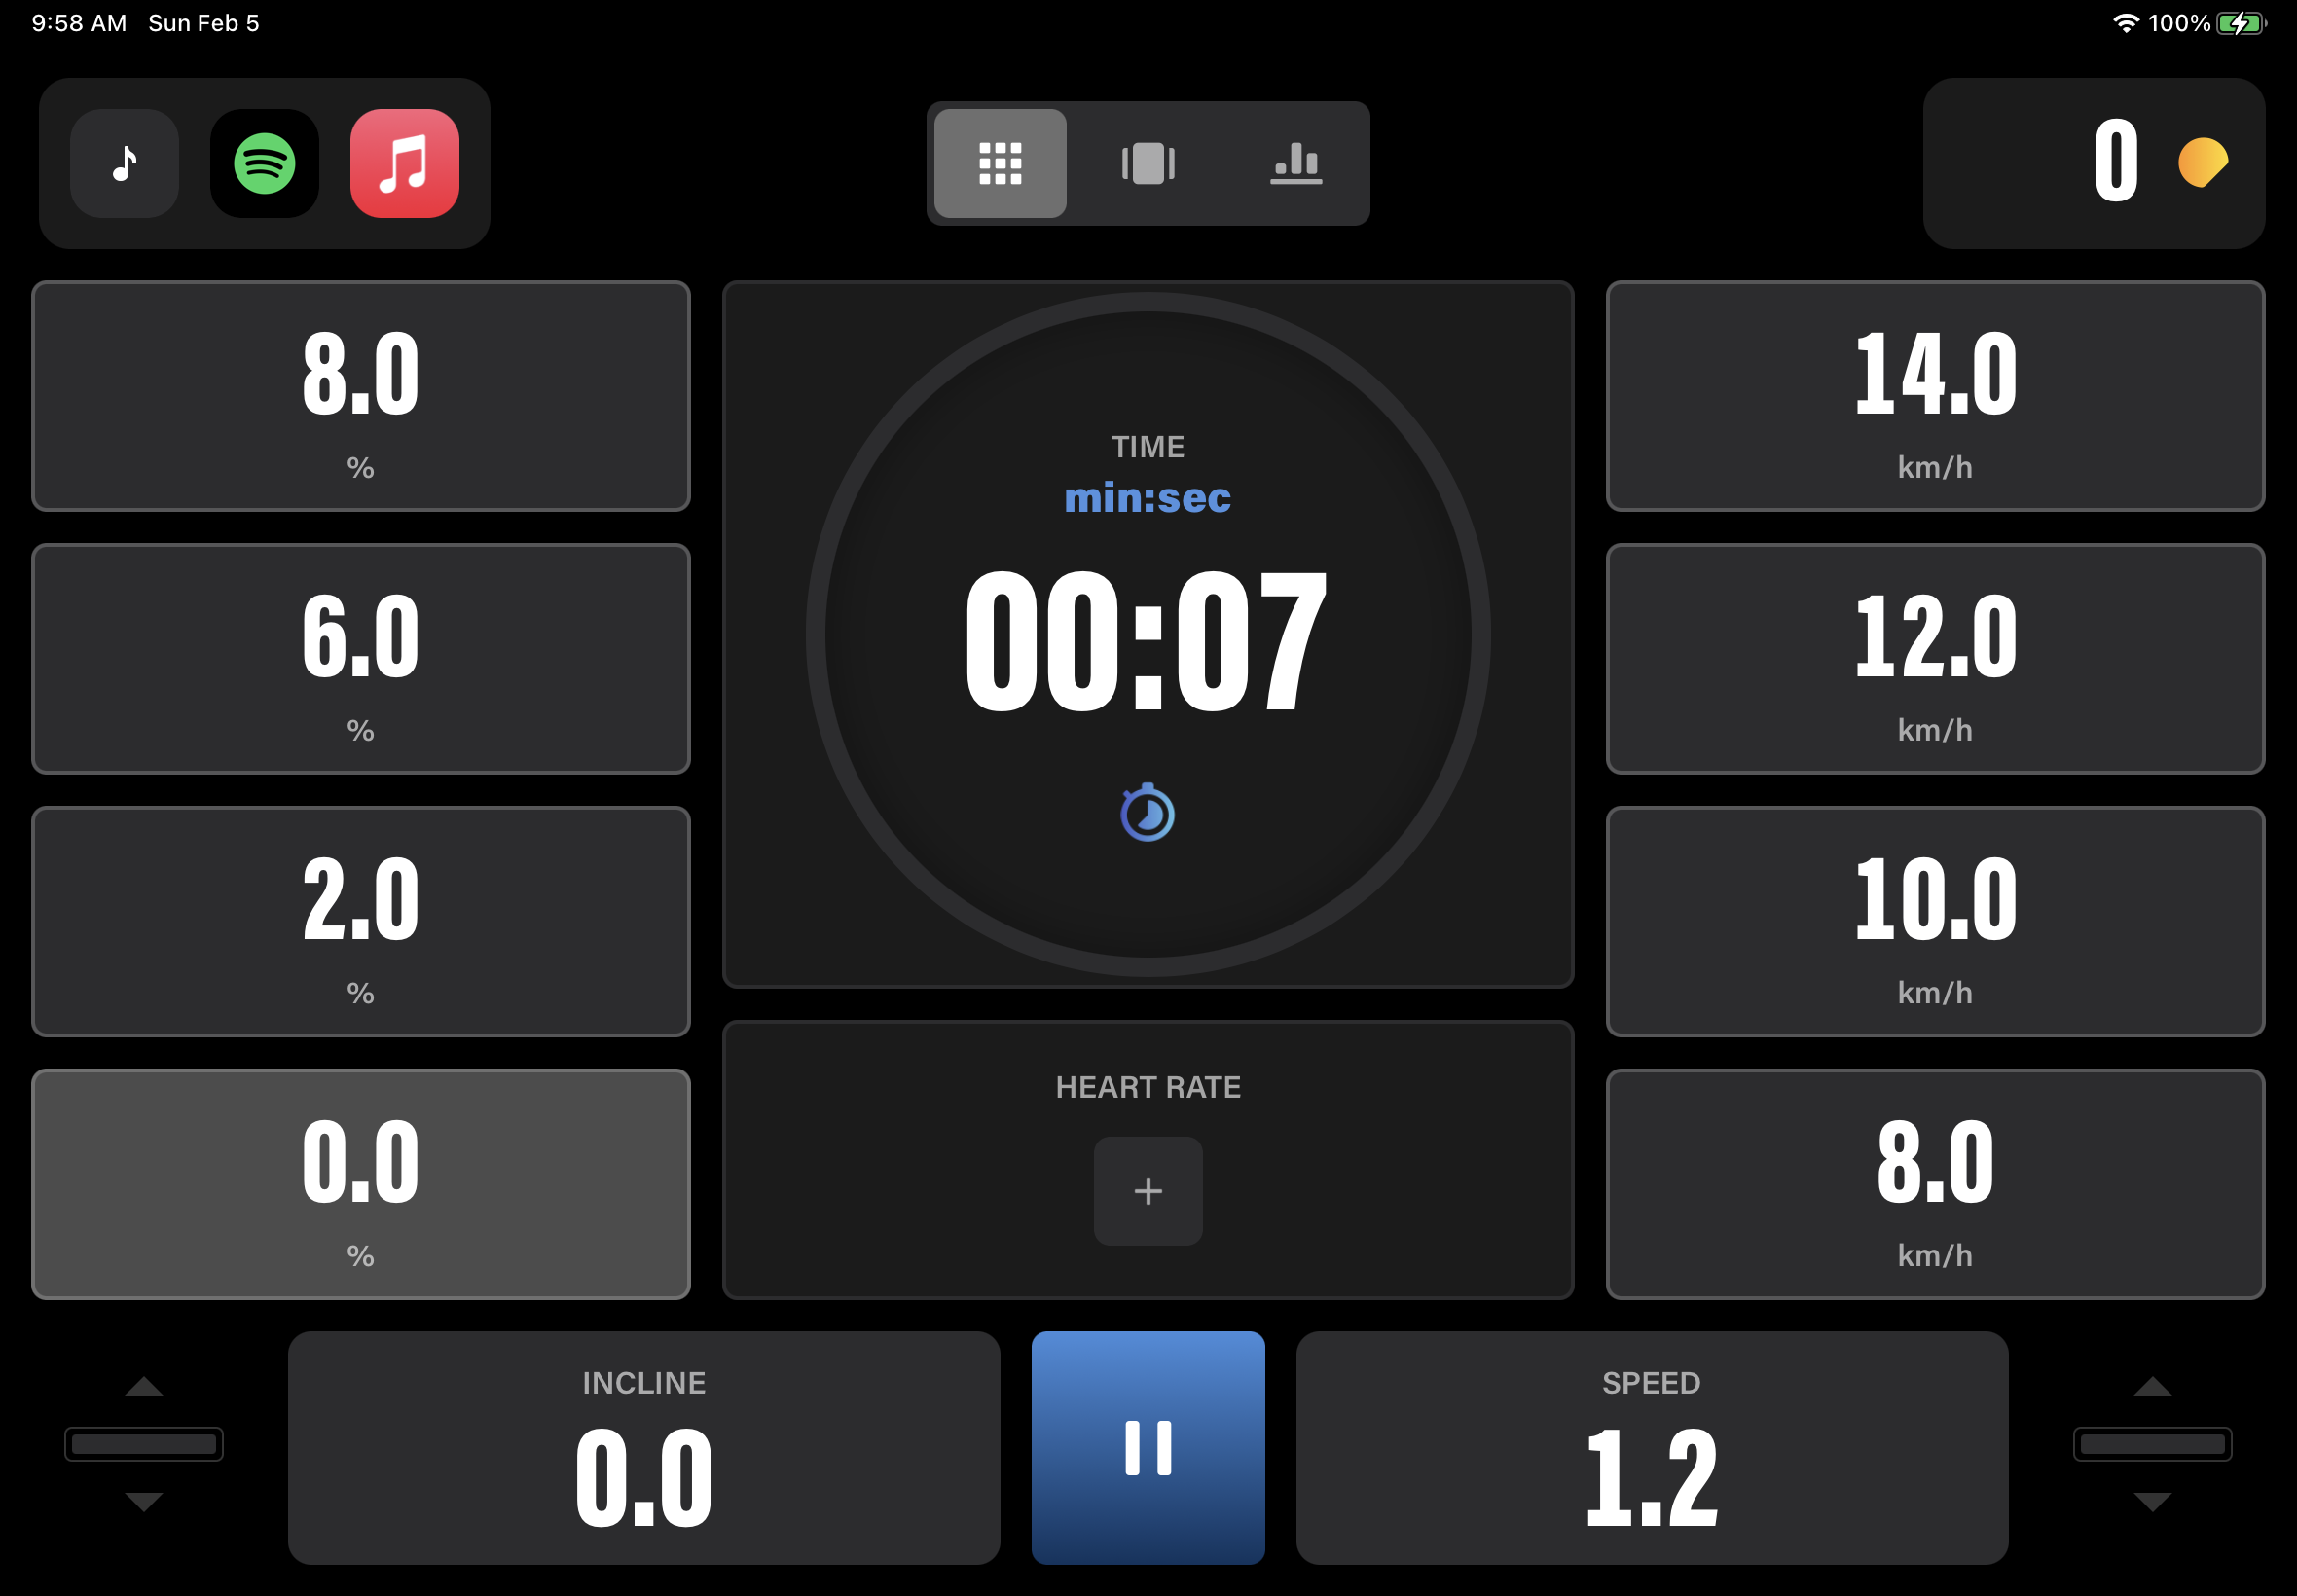 A screenshot of the Swiftpad view during a workout, showing preset options for various speeds and inclines, and a large timer in the center.